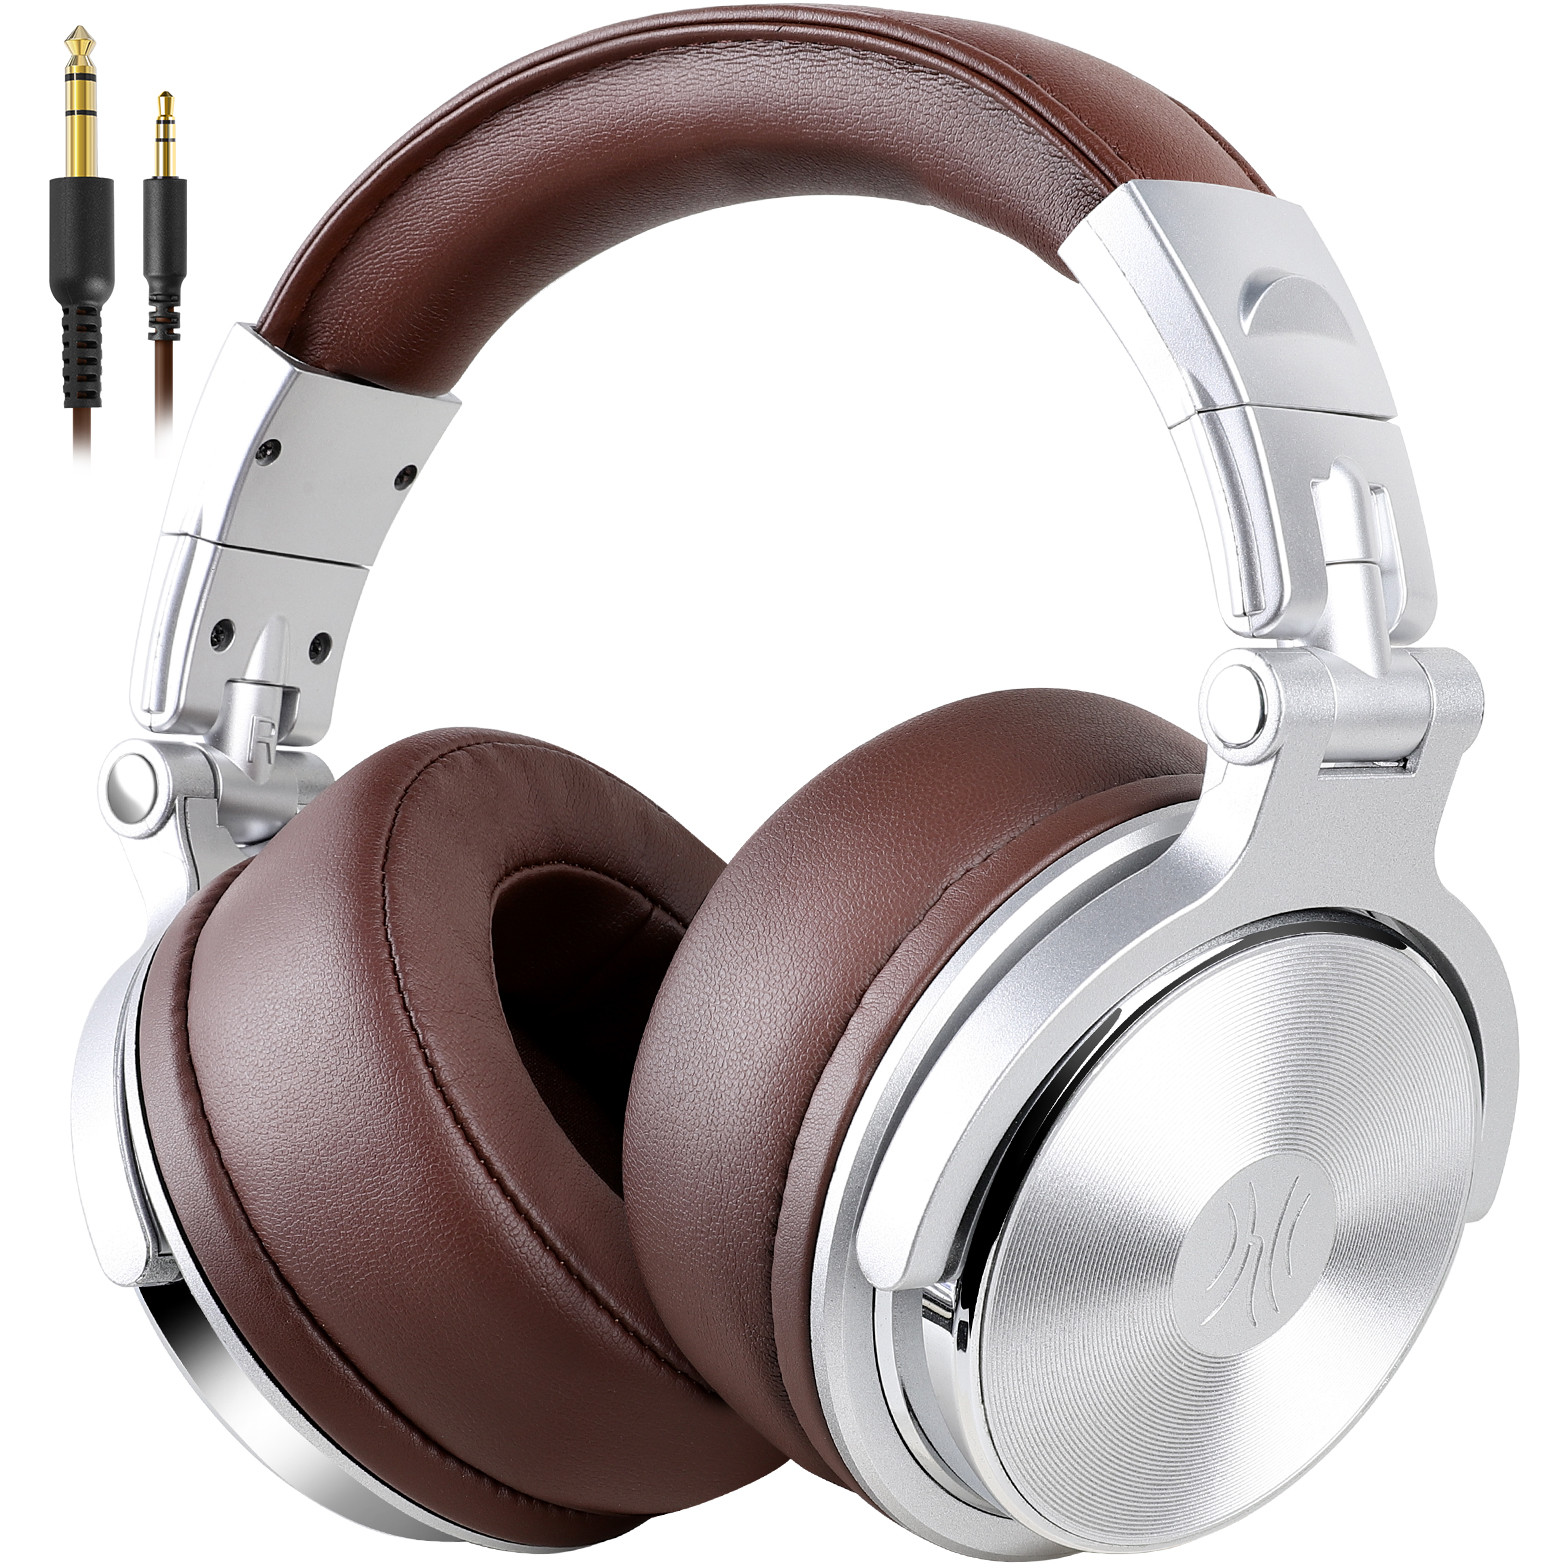 6974028140496 OneOdio Pro-40, Pro Series (wired), silver-brown - Hovedtele TV & HIFI,Hovedtelefoner,On-ear / over-ear hovedtelefoner 21100001550 Pro40